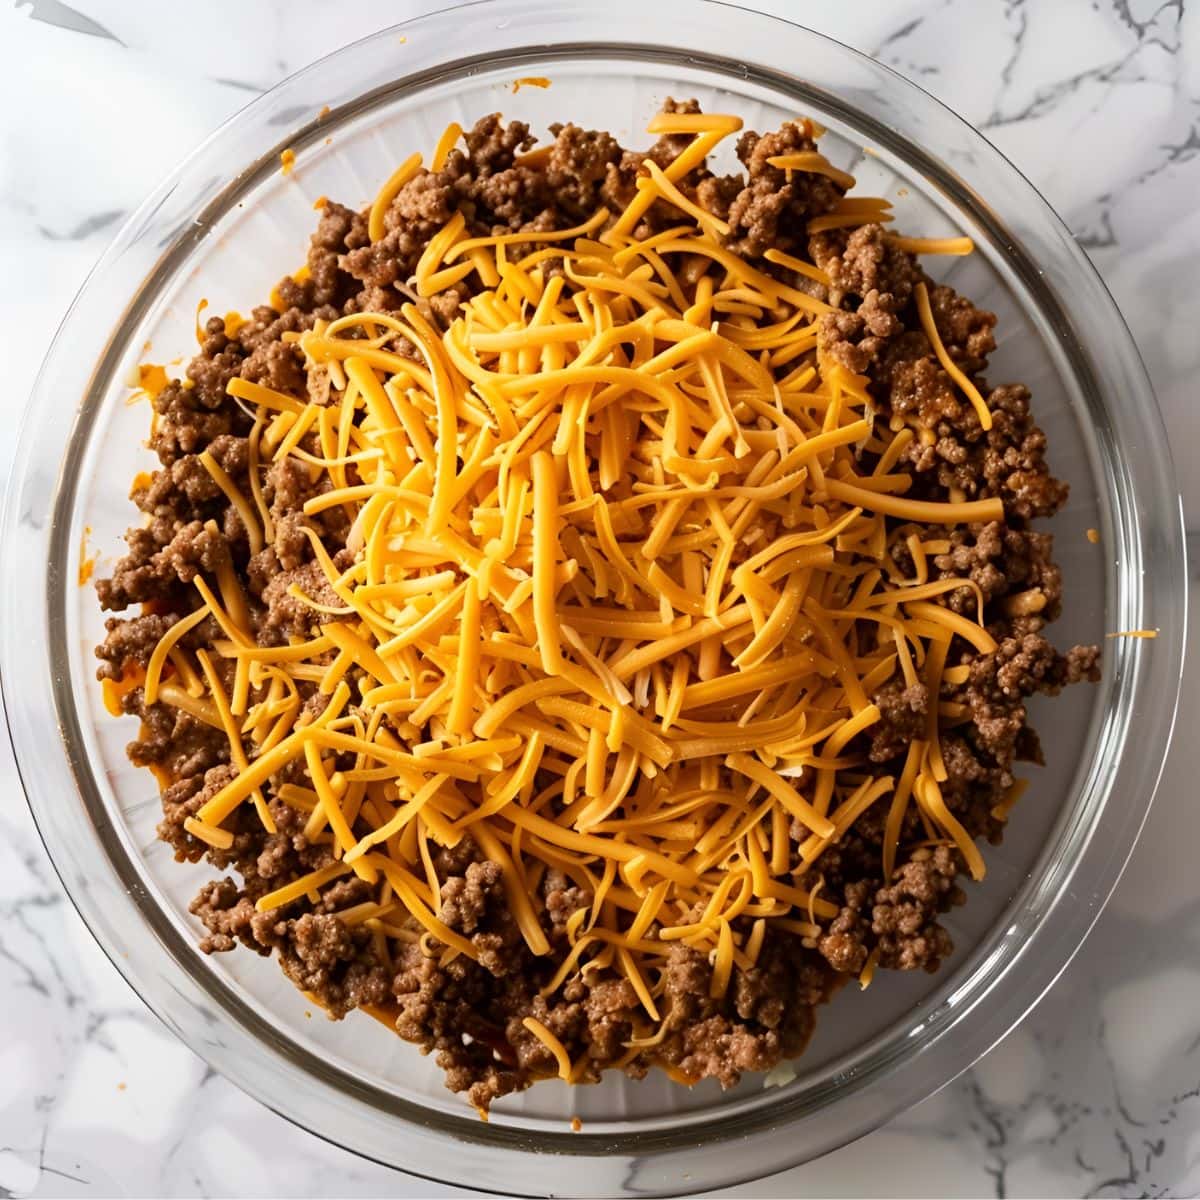 Top View of Ground Beef and Shredded Cheddar Cheese in a Glass Bowl on a White Marble Table